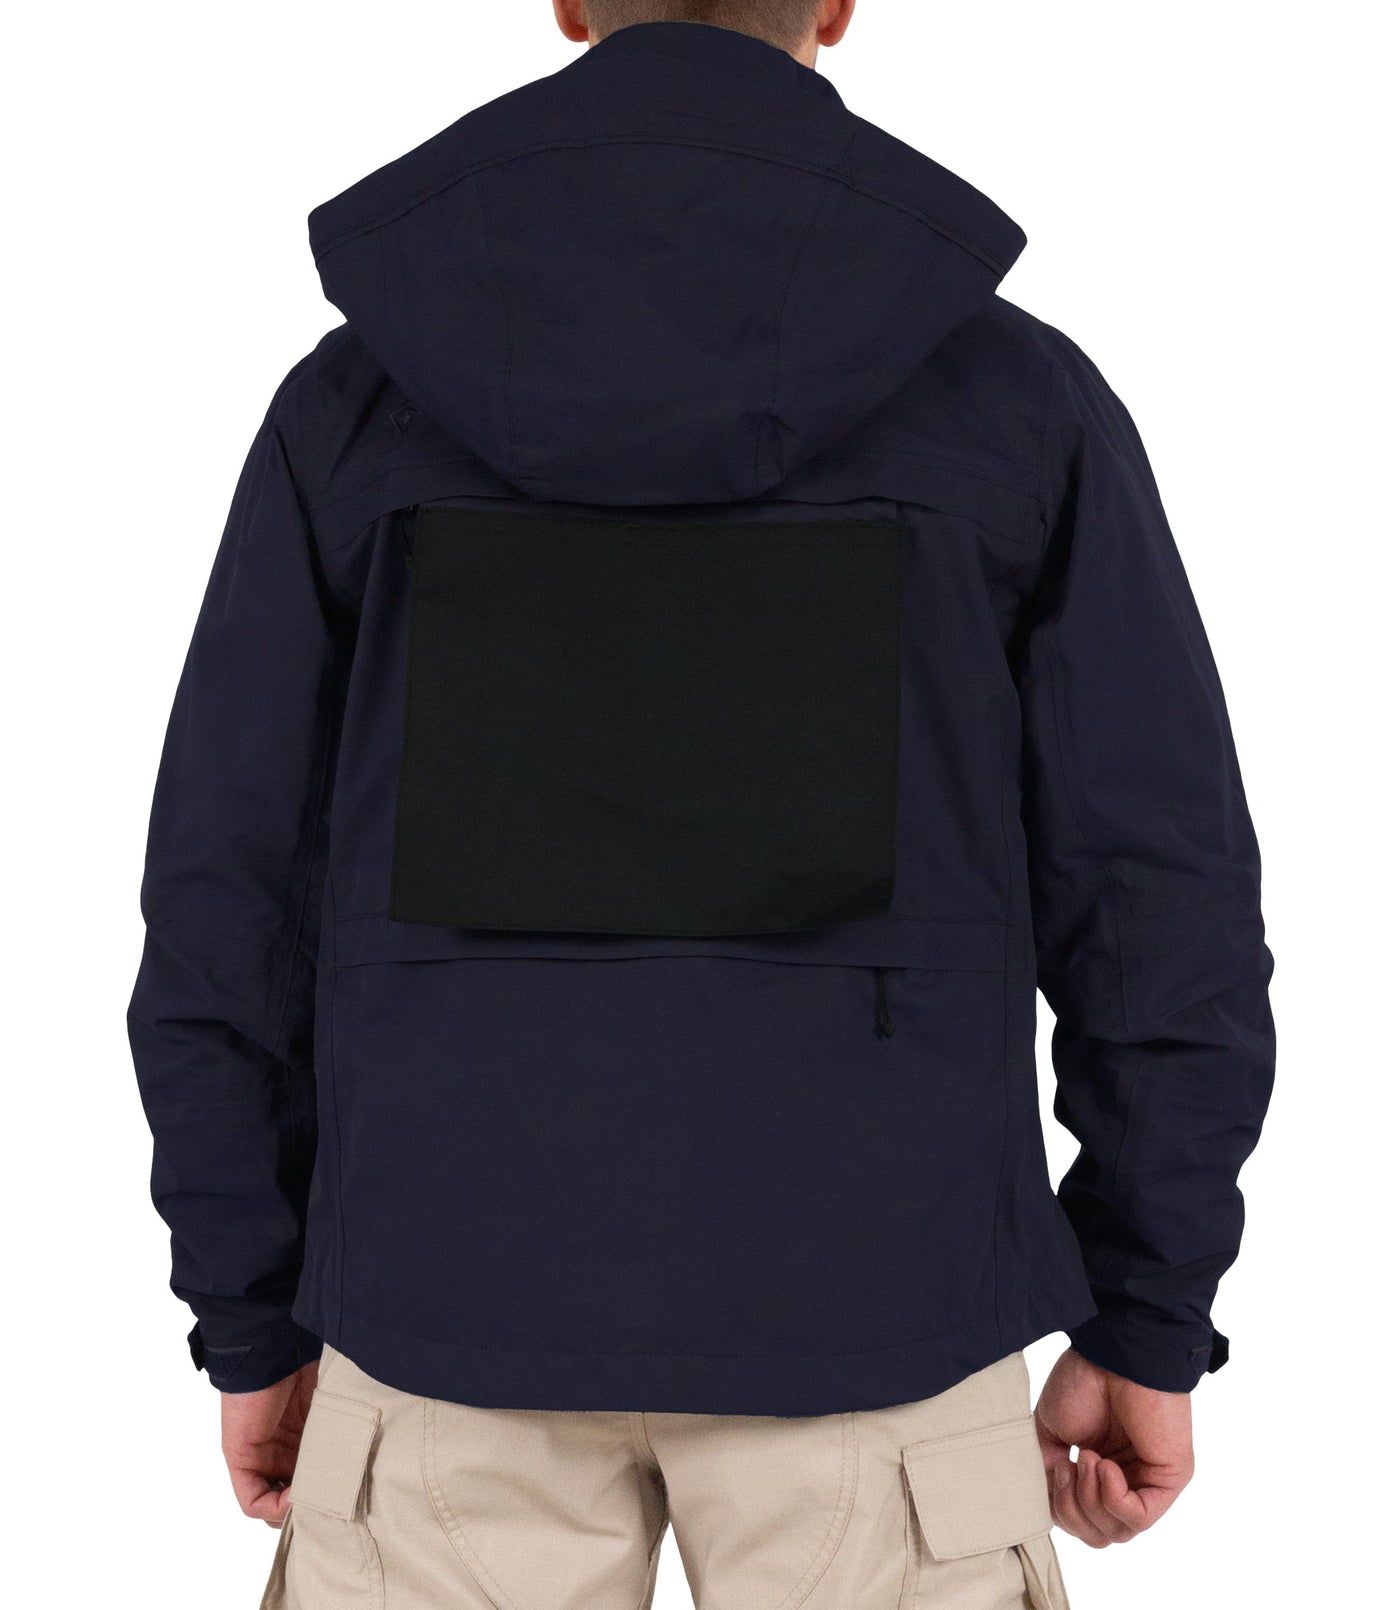 Back Pullout Panel for Men’s Tactix System Jacket in Midnight Navy